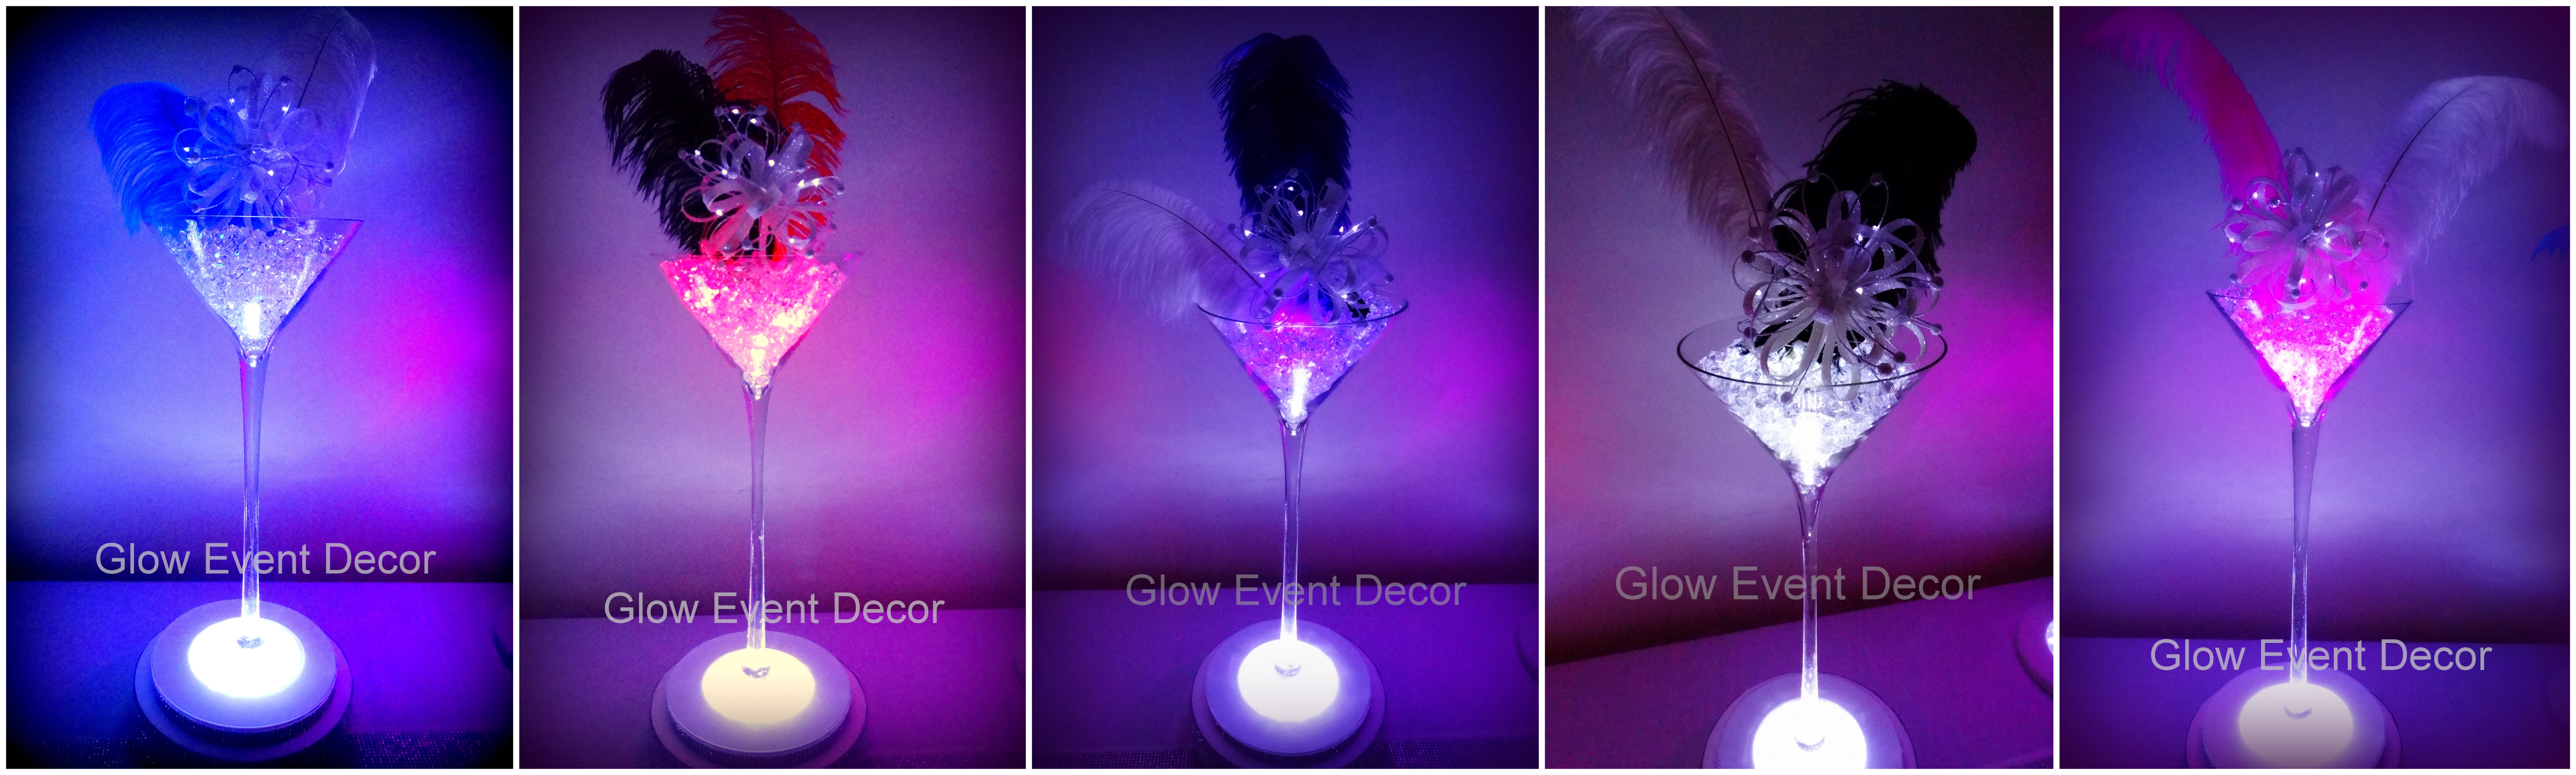 selection of giant LED martini glass table decoration centrepieces with LED light bases and ostrich feathers, for hire in adelaide, glow event decor.